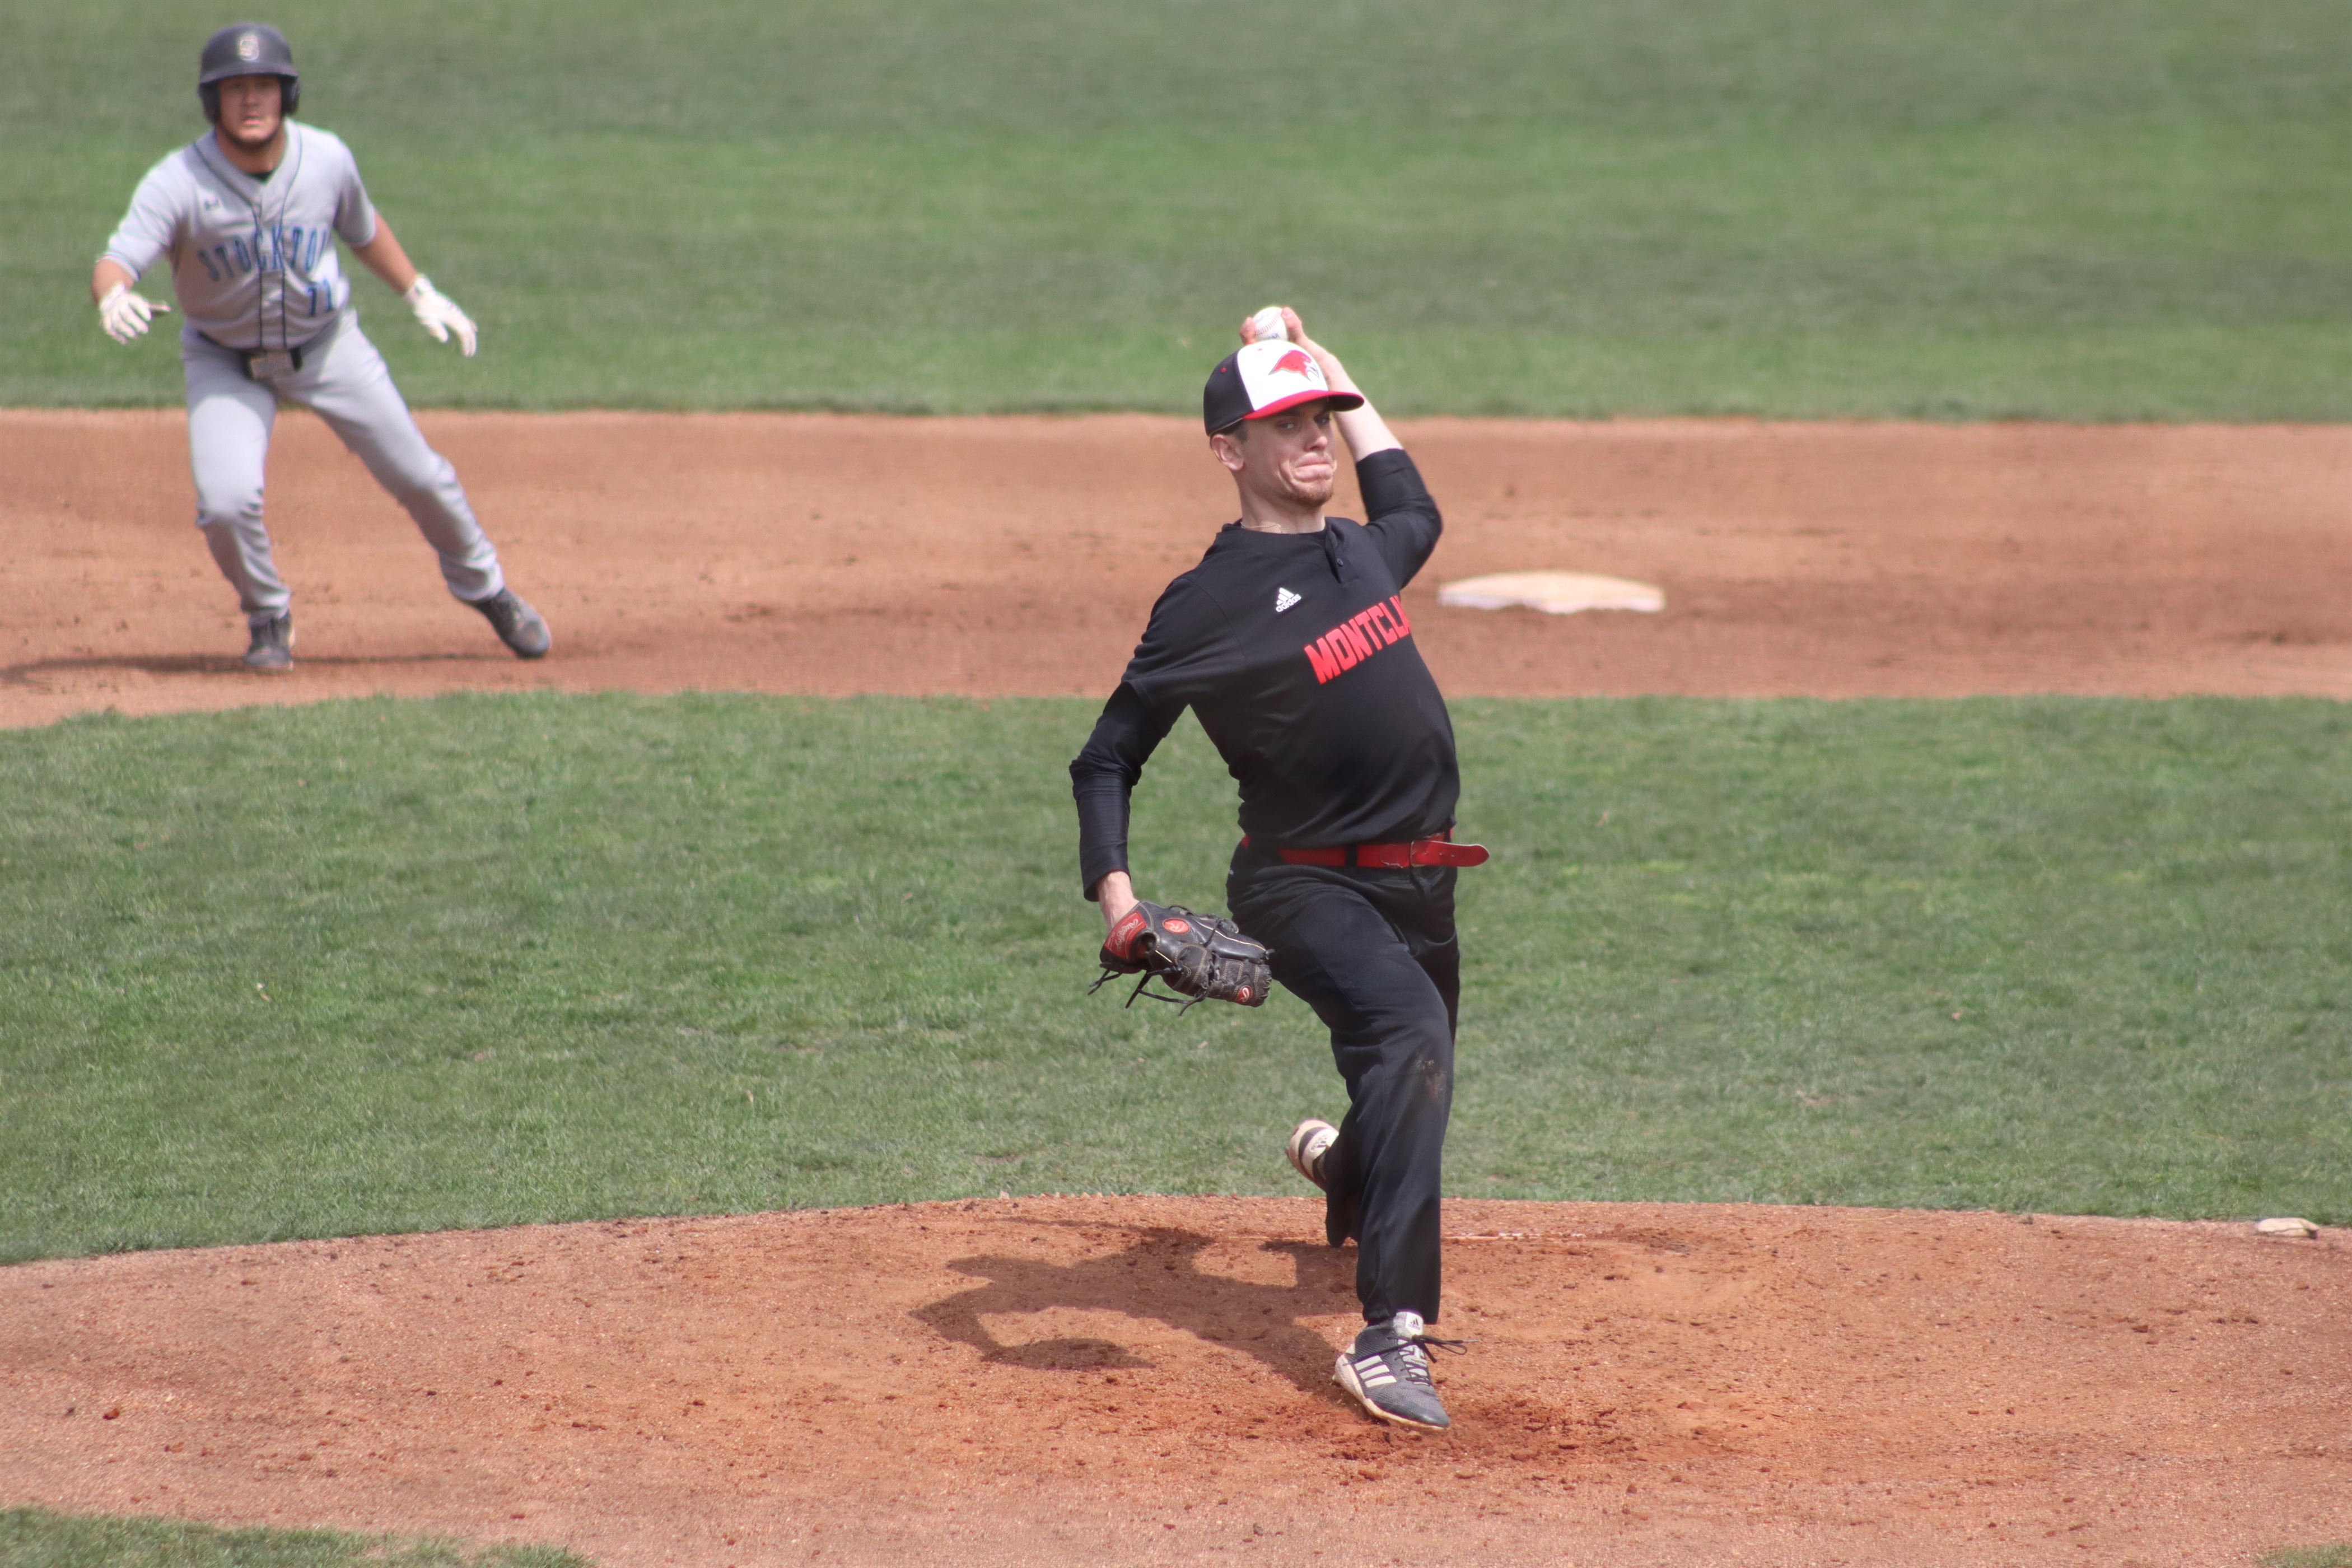 Montclair State gets ready to throw the pitch. Trevor Giesberg | The Montclarion